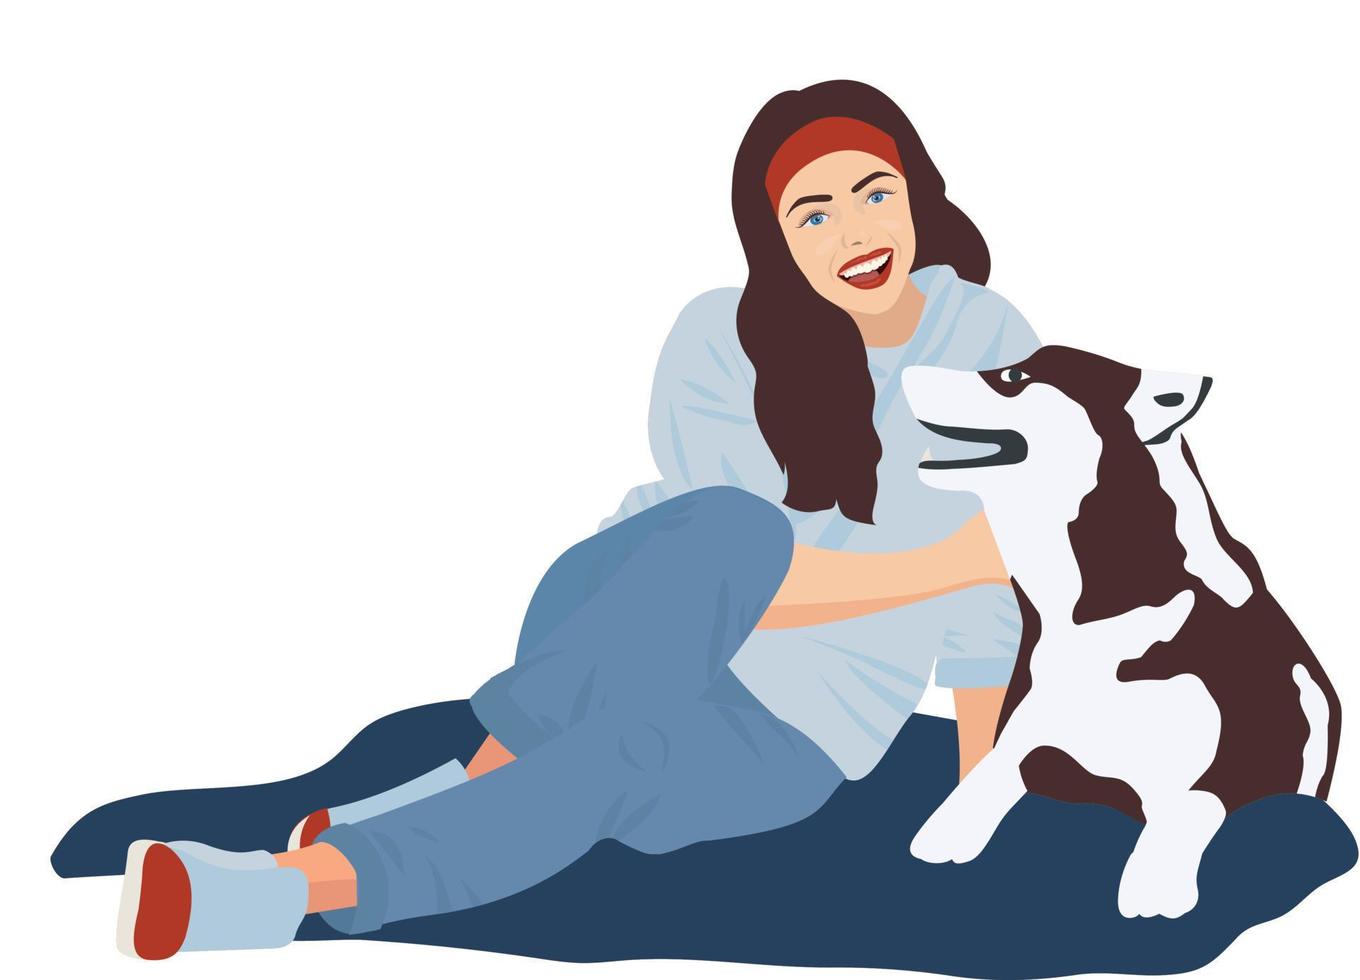 Girl with a dog. Vector illustration in a flat style.